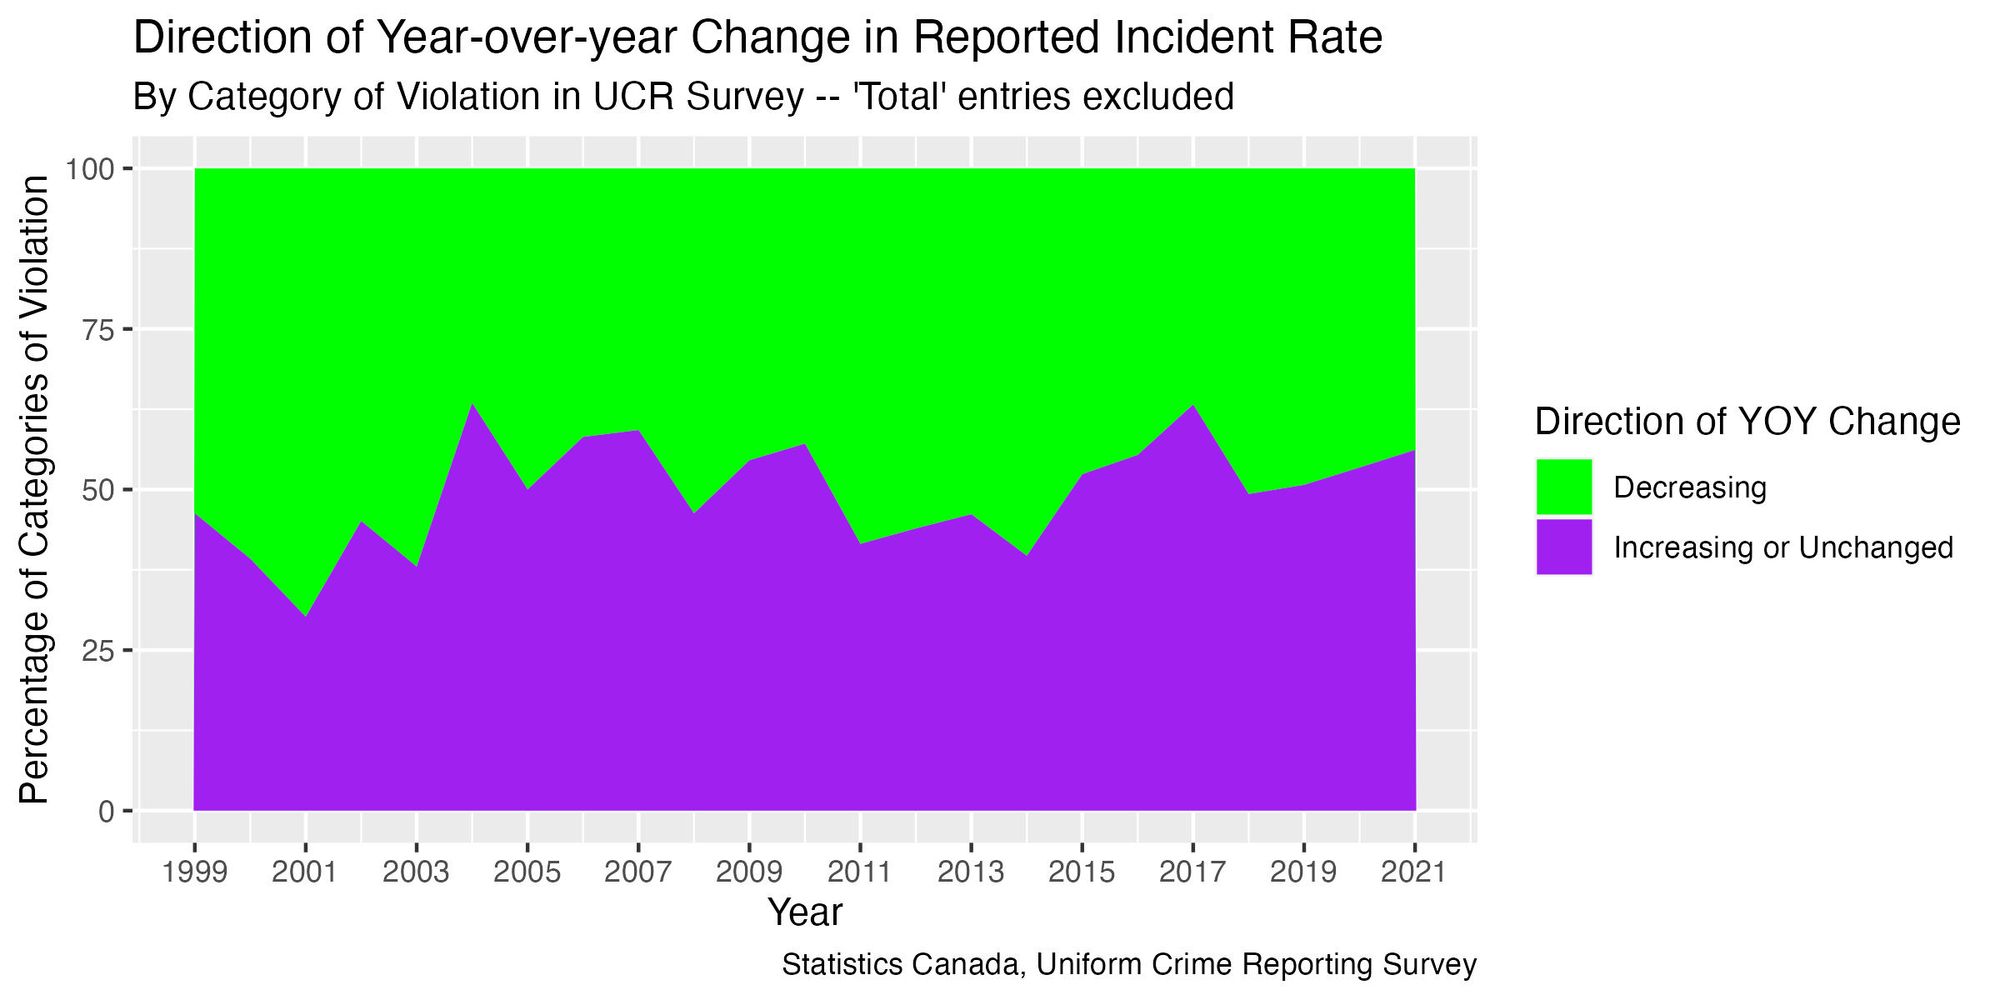 A graph for “Direction of Year-over-year Change in Reported Incident Rate” for categories of violation in the UCR, excluding “Total” entries. The area is shaded green to represent decreasing violations, and purple to represent violations that are increasing or unchanged, for each year between 2015 and 2021. The area is close to being evenly split between green and purple.